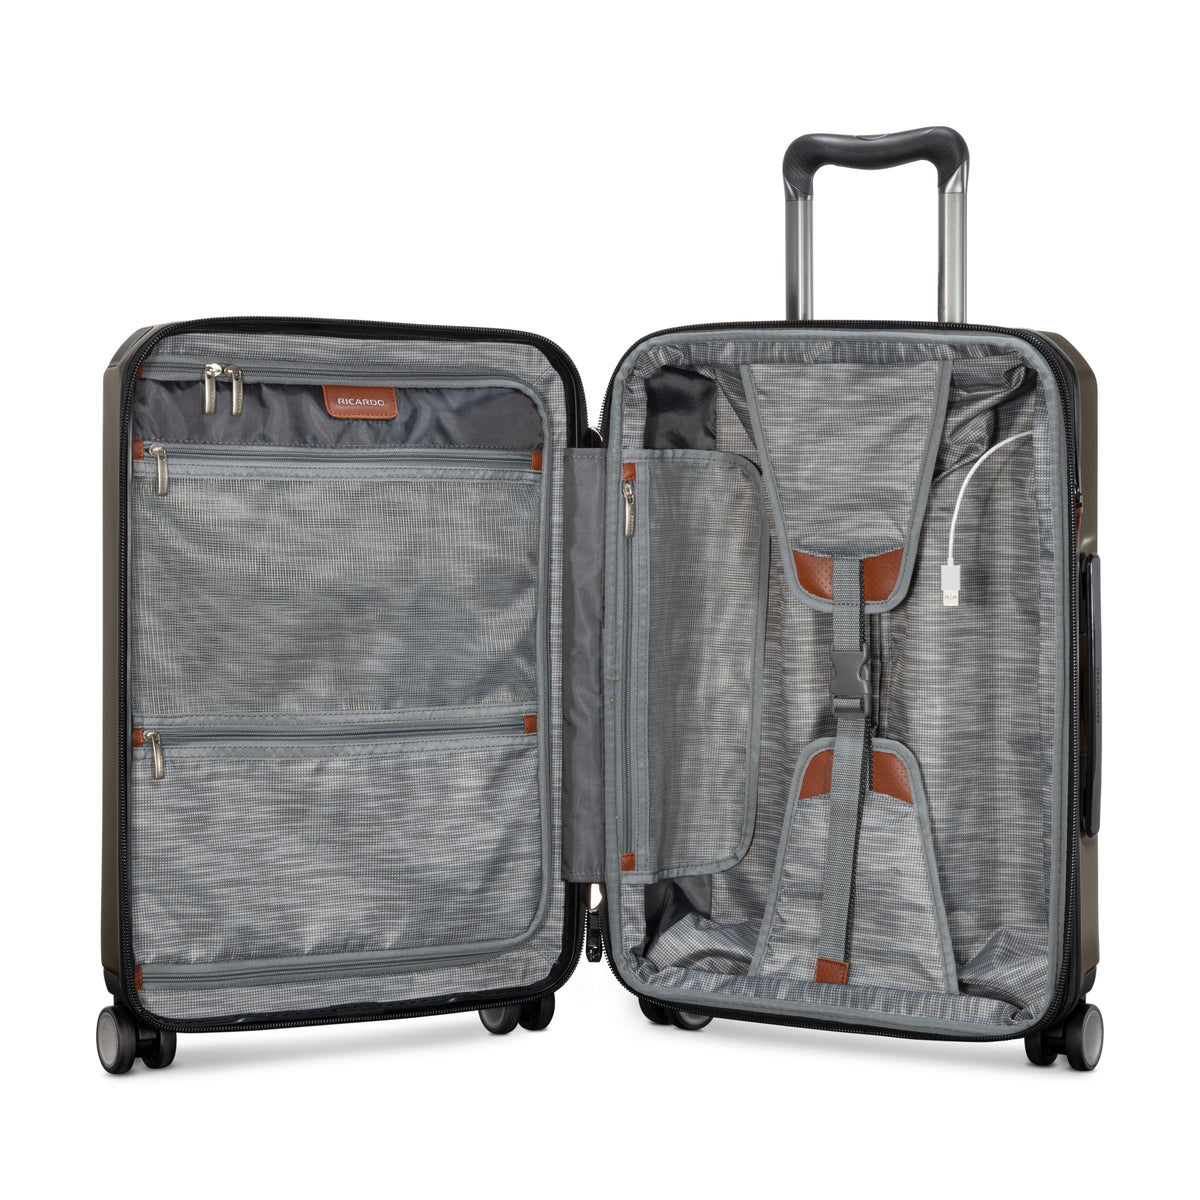 Montecito 2.0 Hardside Carry-On Expandable Spinner (Bundle)